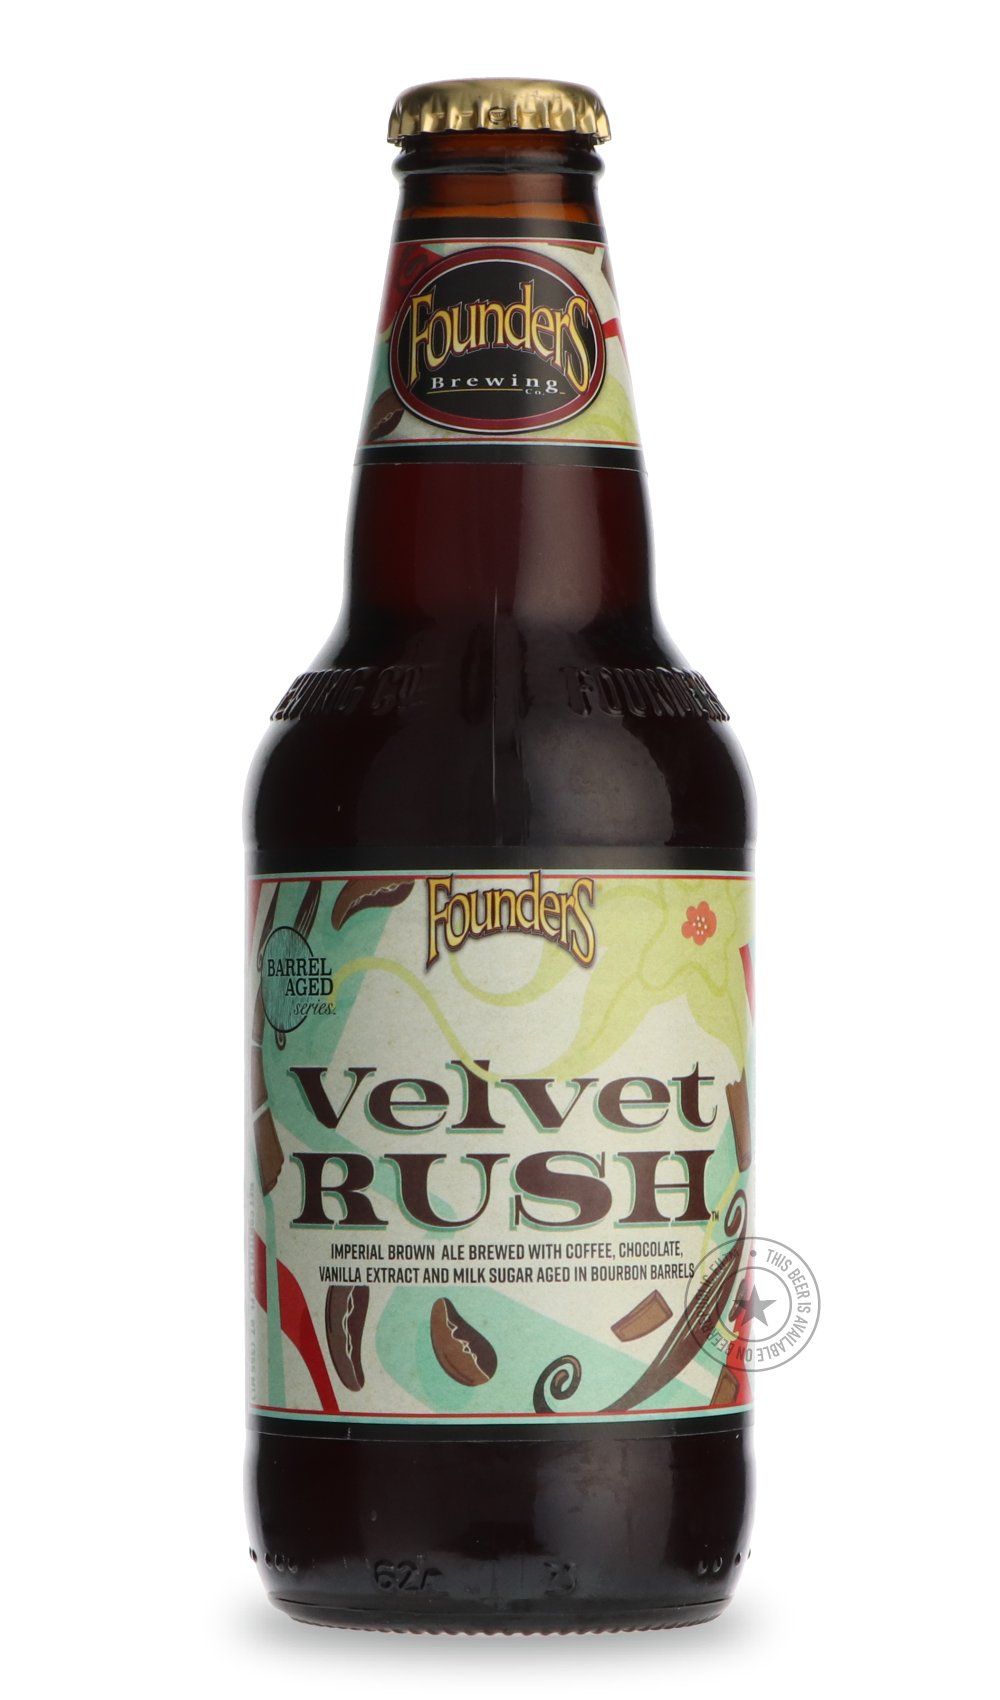 -Founders- Velvet Rush-Brown & Dark- Only @ Beer Republic - The best online beer store for American & Canadian craft beer - Buy beer online from the USA and Canada - Bier online kopen - Amerikaans bier kopen - Craft beer store - Craft beer kopen - Amerikanisch bier kaufen - Bier online kaufen - Acheter biere online - IPA - Stout - Porter - New England IPA - Hazy IPA - Imperial Stout - Barrel Aged - Barrel Aged Imperial Stout - Brown - Dark beer - Blond - Blonde - Pilsner - Lager - Wheat - Weizen - Amber - B